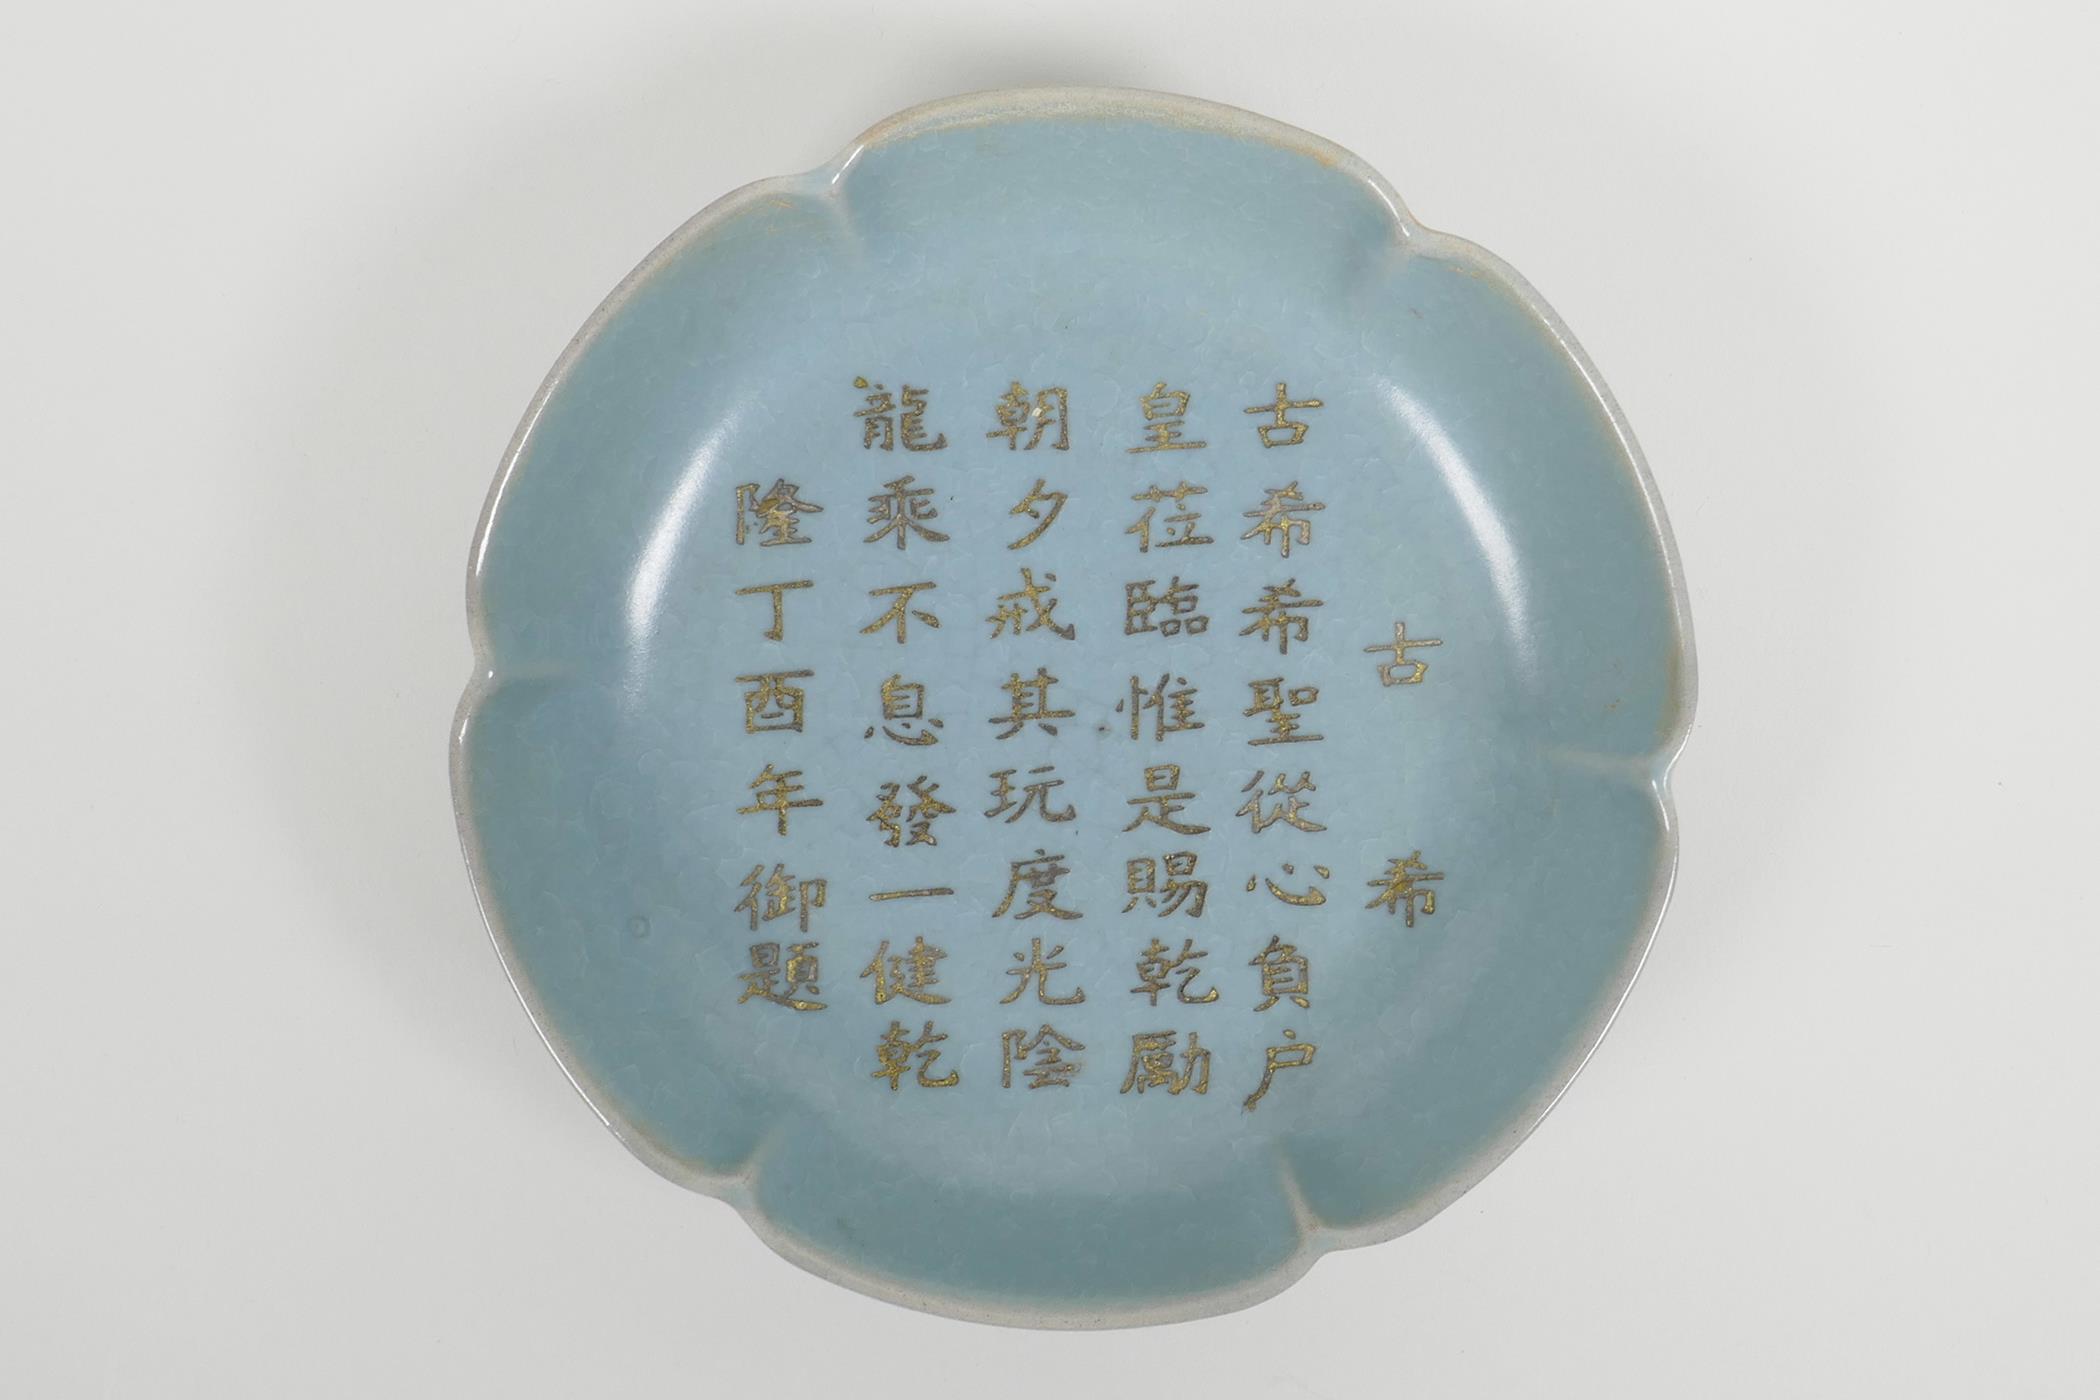 A Chinese Ru ware style porcelain dish with a shaped rim and chased and engraved character